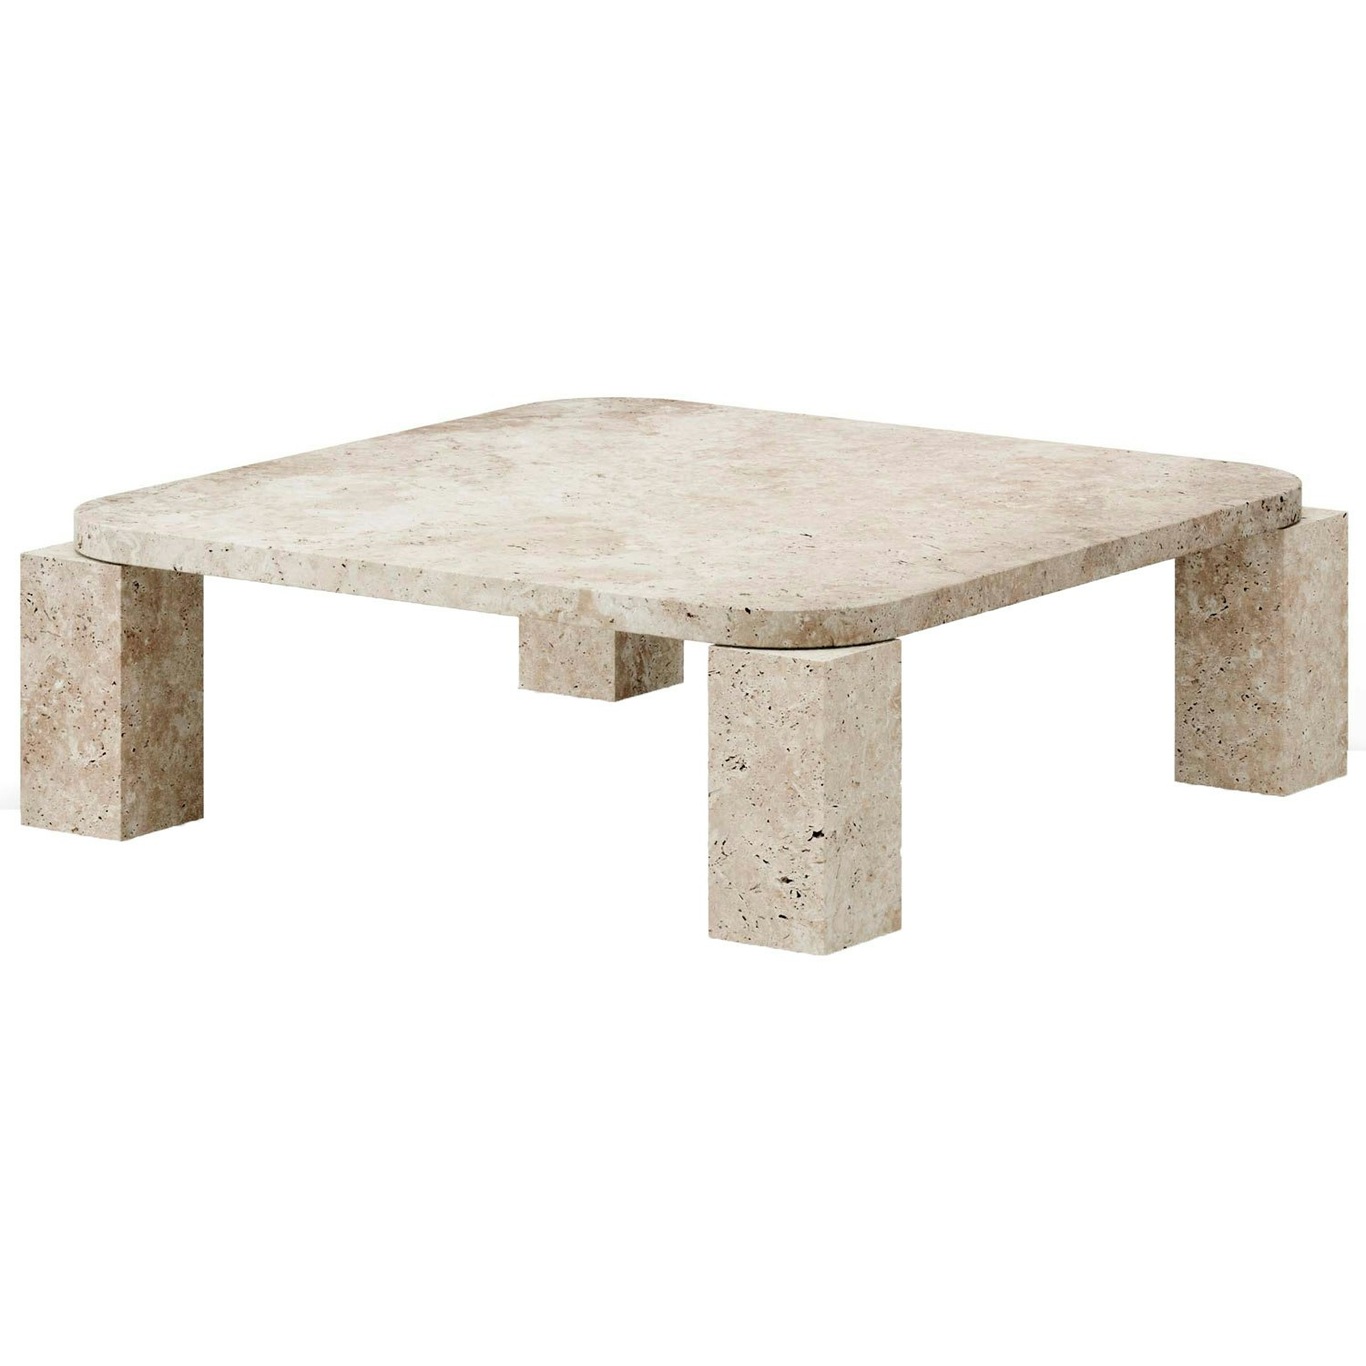 Atlas Coffee Table 820x820 mm, Unfilled Travertine